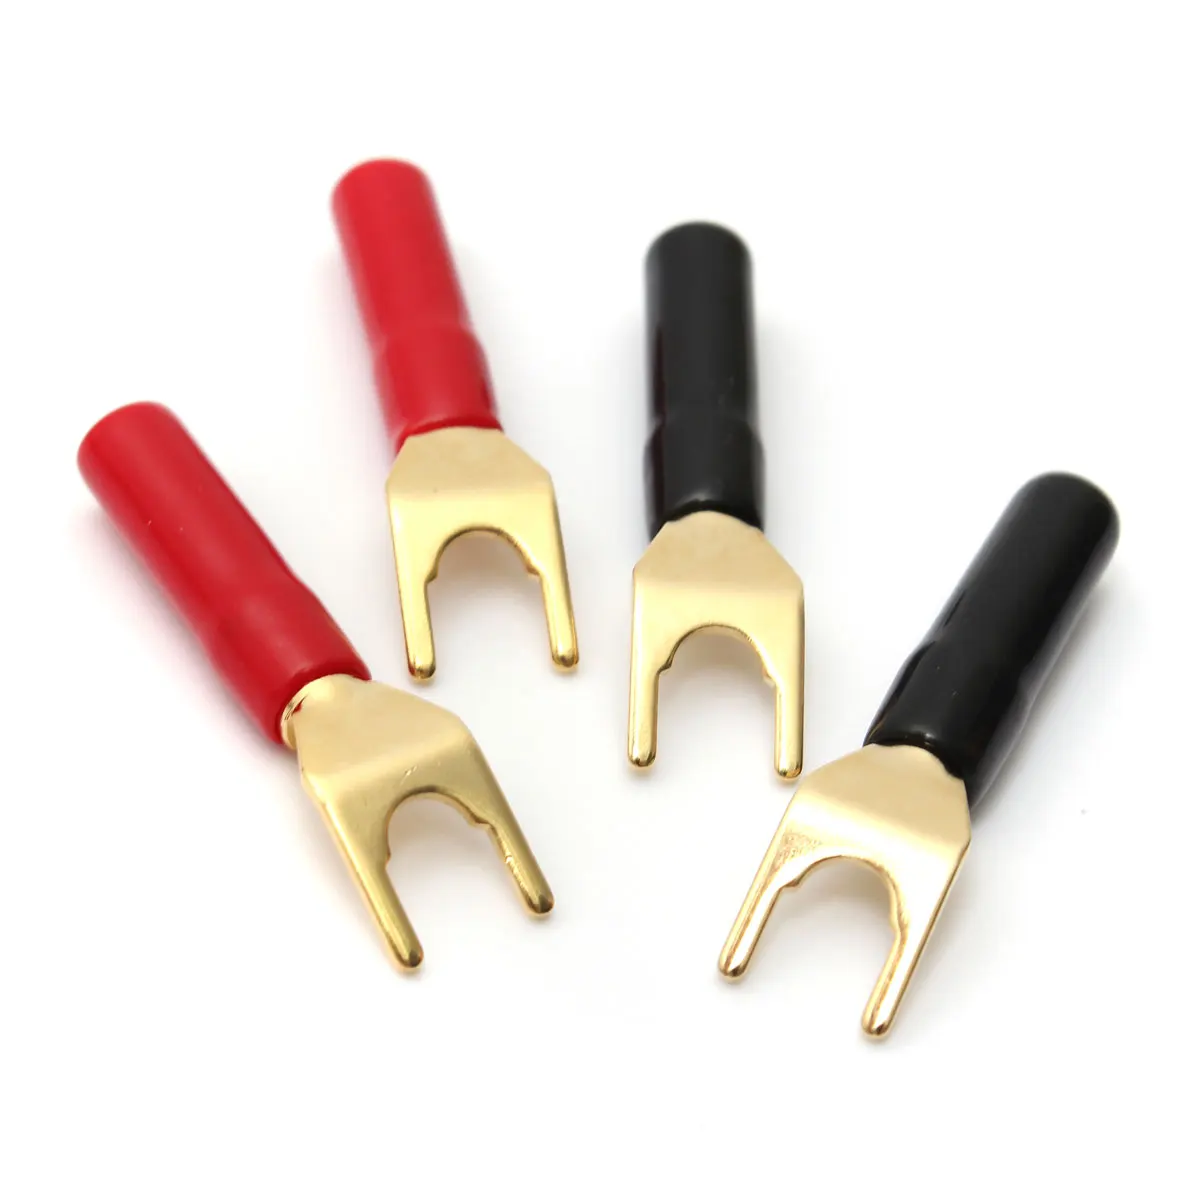 

4Pcs Y-style Spade Banana Plug Gold Plated Tuning Fork Banana Plug Solderless Speaker Cable Power Terminals Connectors set